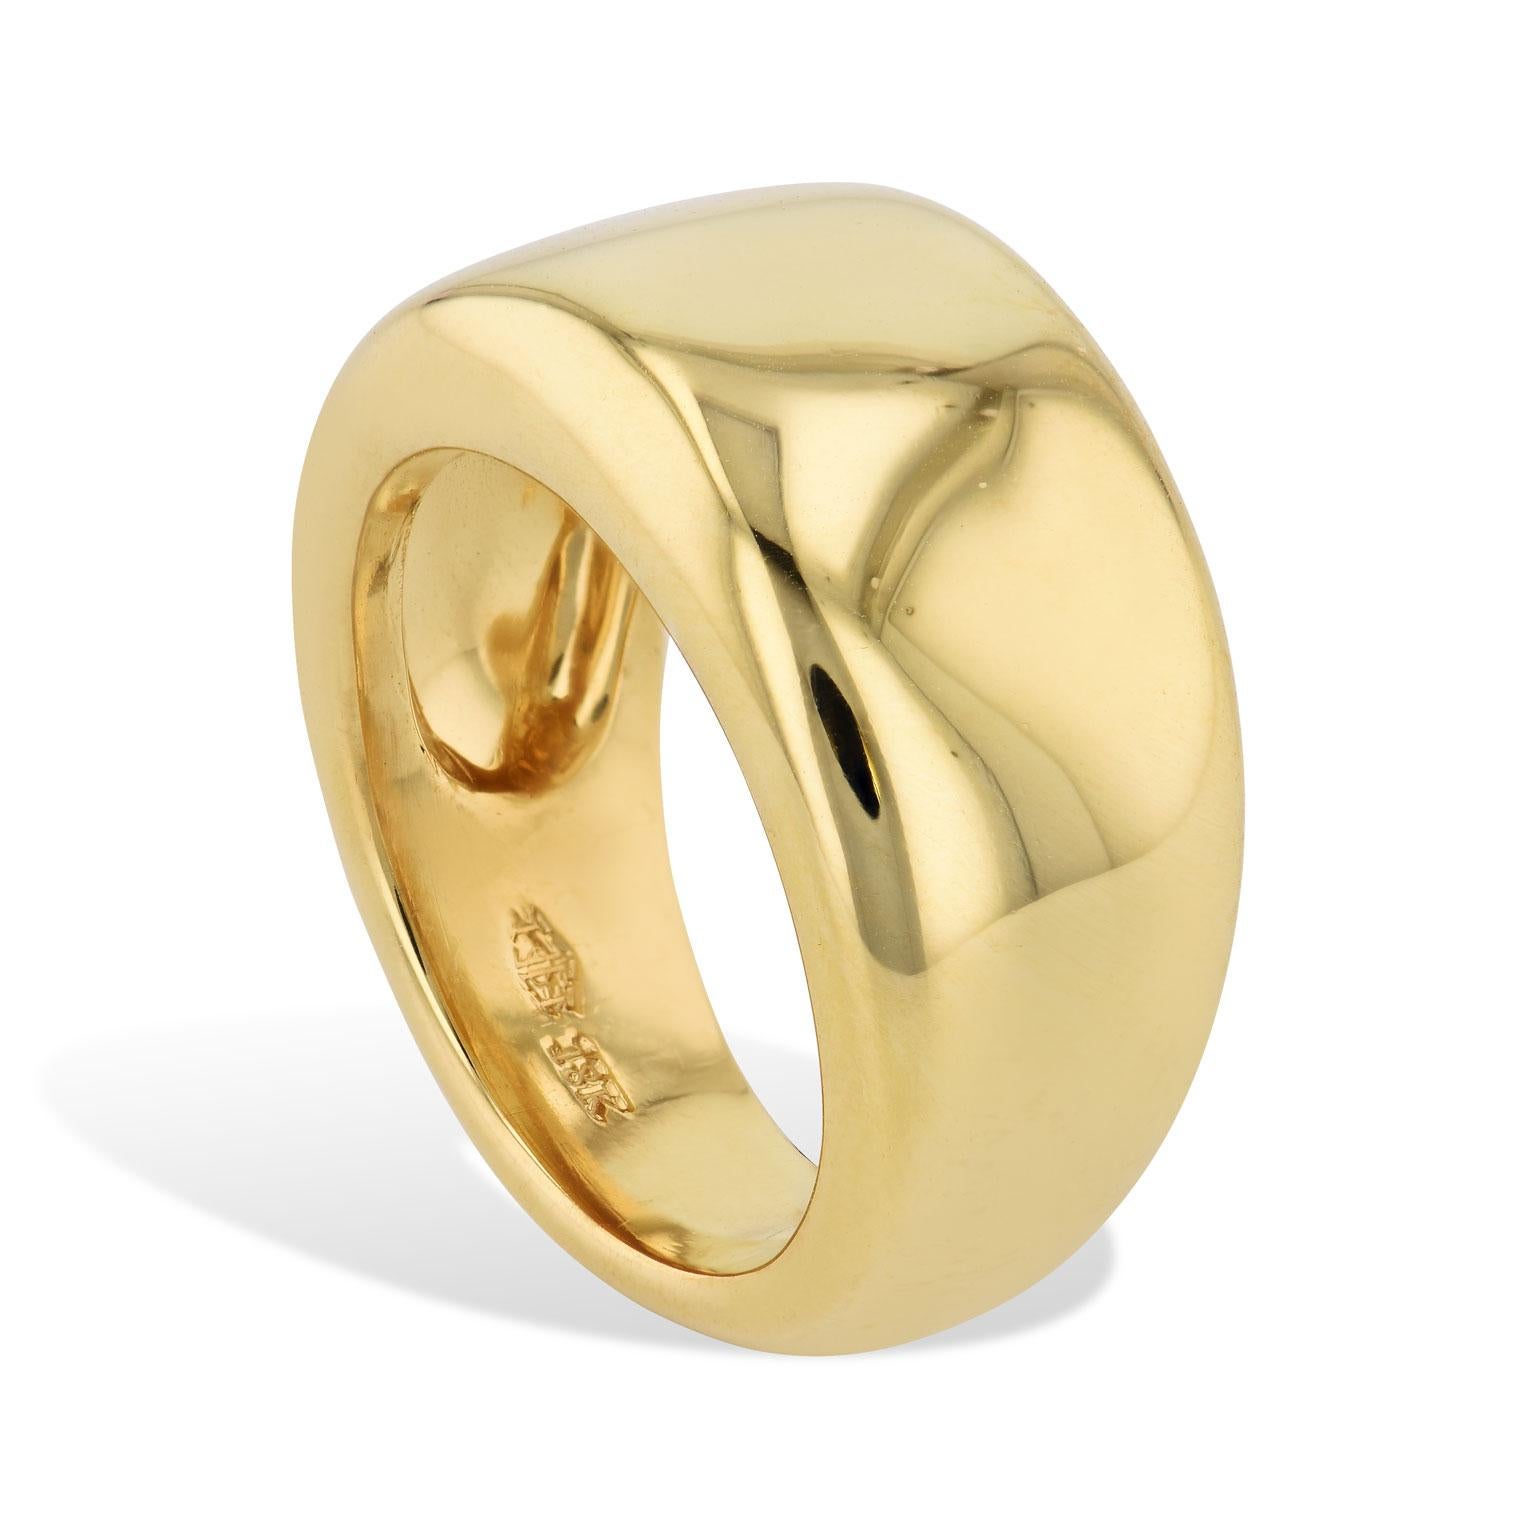 This handmade 18 karat yellow gold band ring is sleek and sumptuous as the smooth contours of the ring hug one’s finger. Enjoy the splendor of yellow gold with this piece.